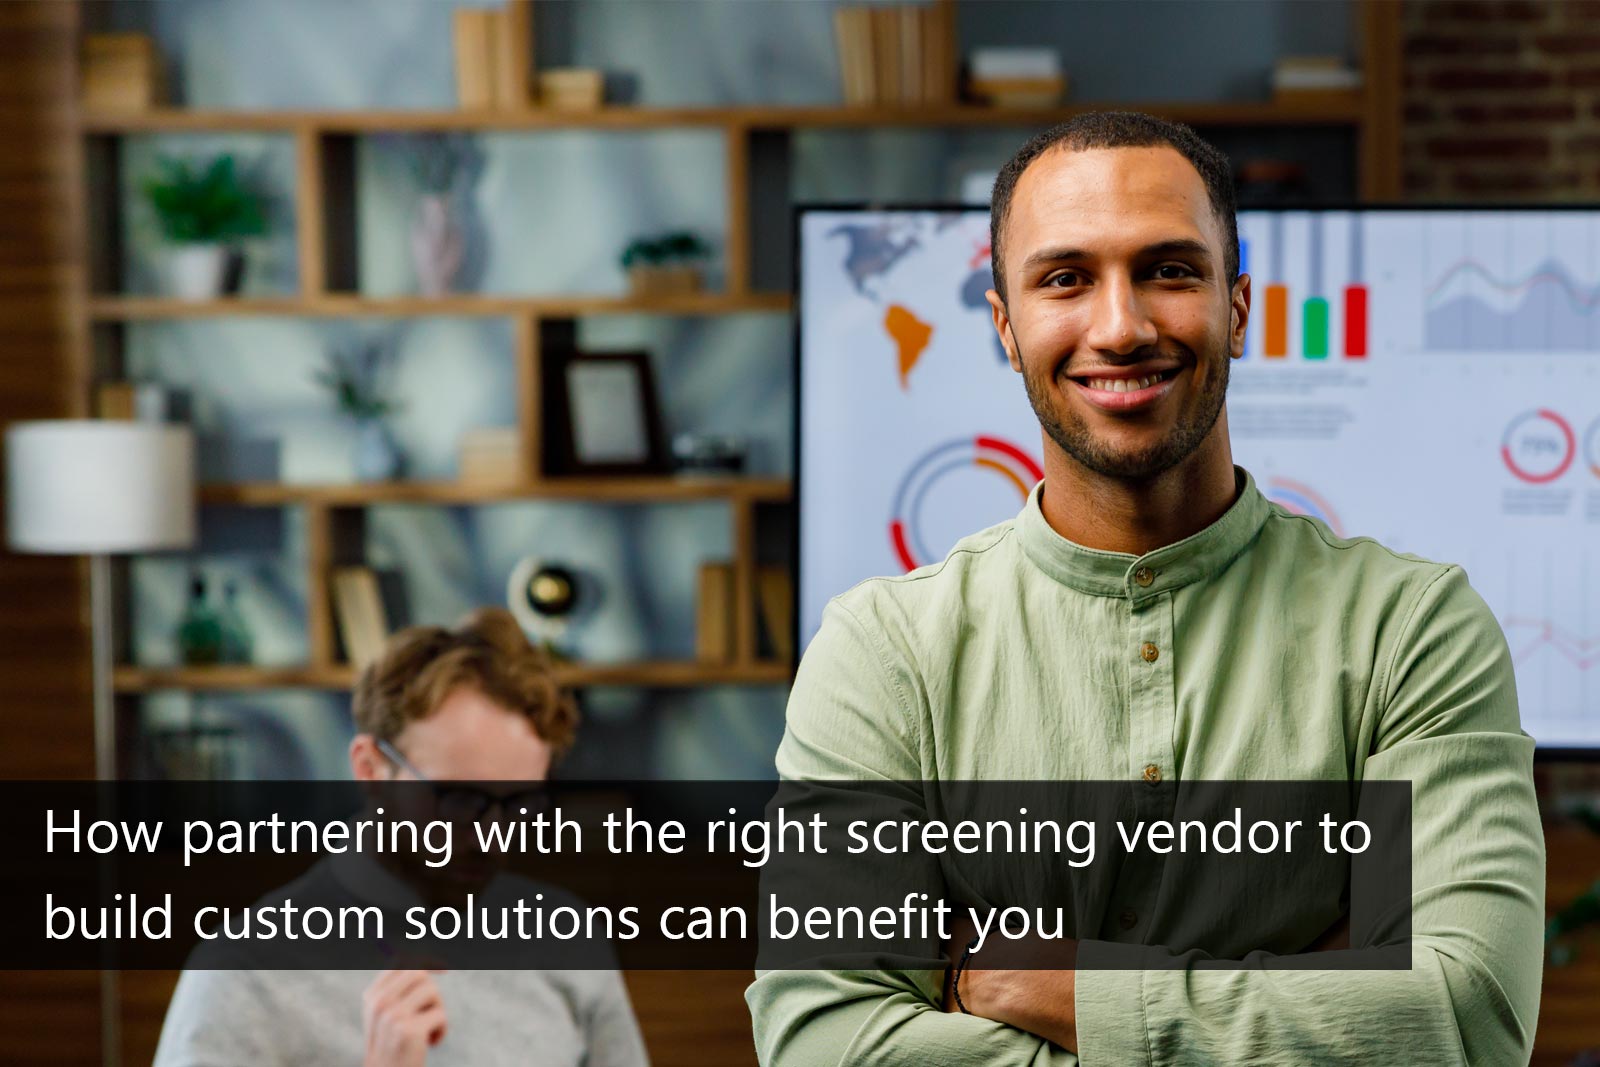 Benefits of Custom Screening Solutions with the Right Vendor Partner